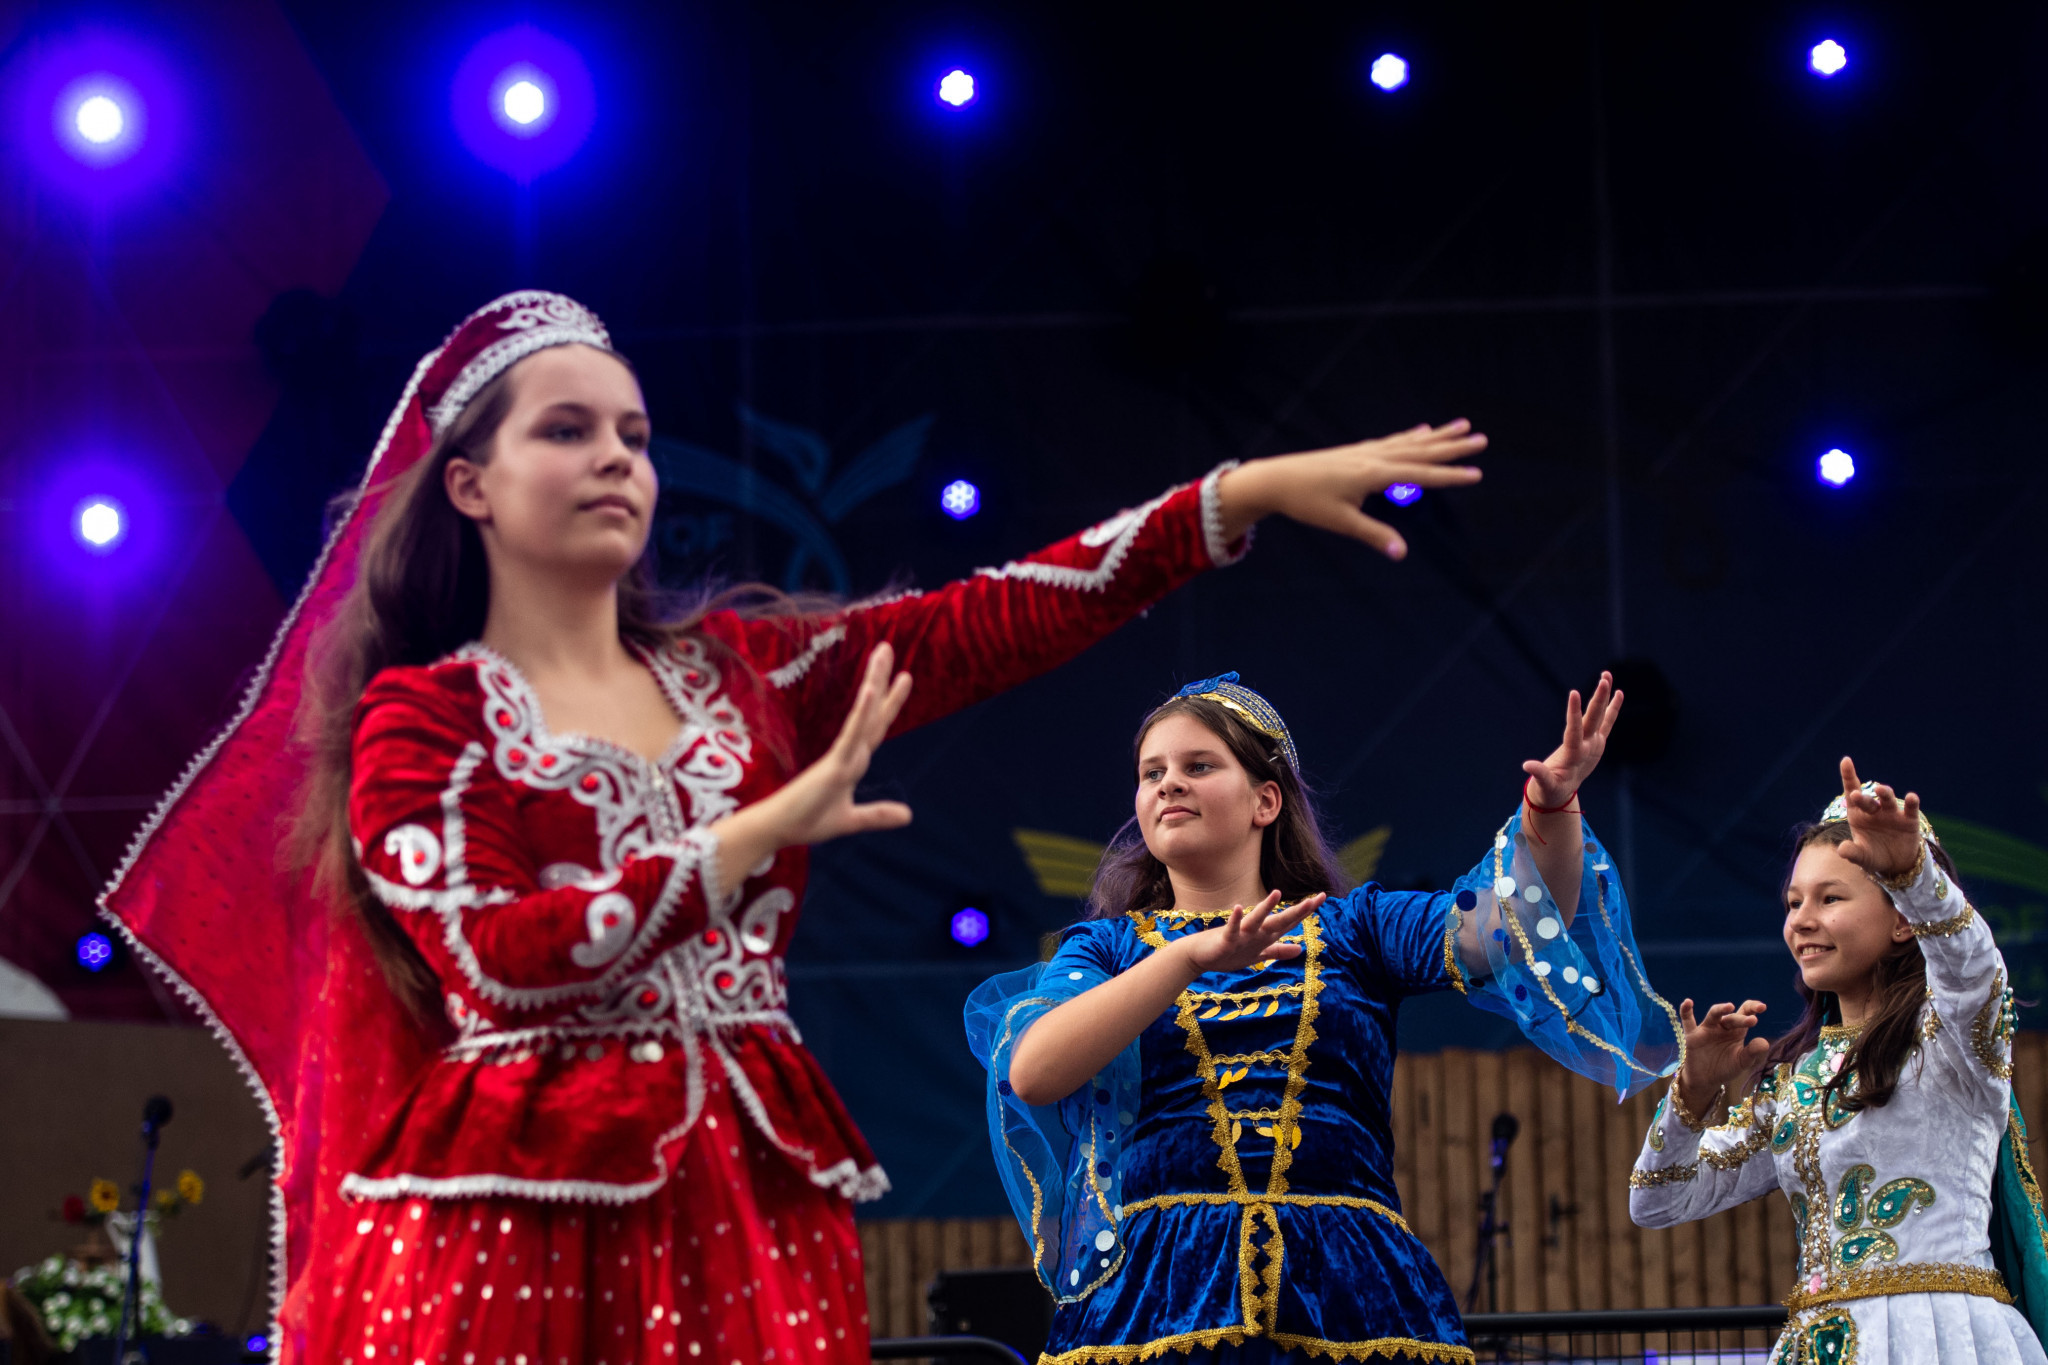 A cultural programme of music and dance with several traditional performances then followed ©EYOF Banská Bystrica 2022